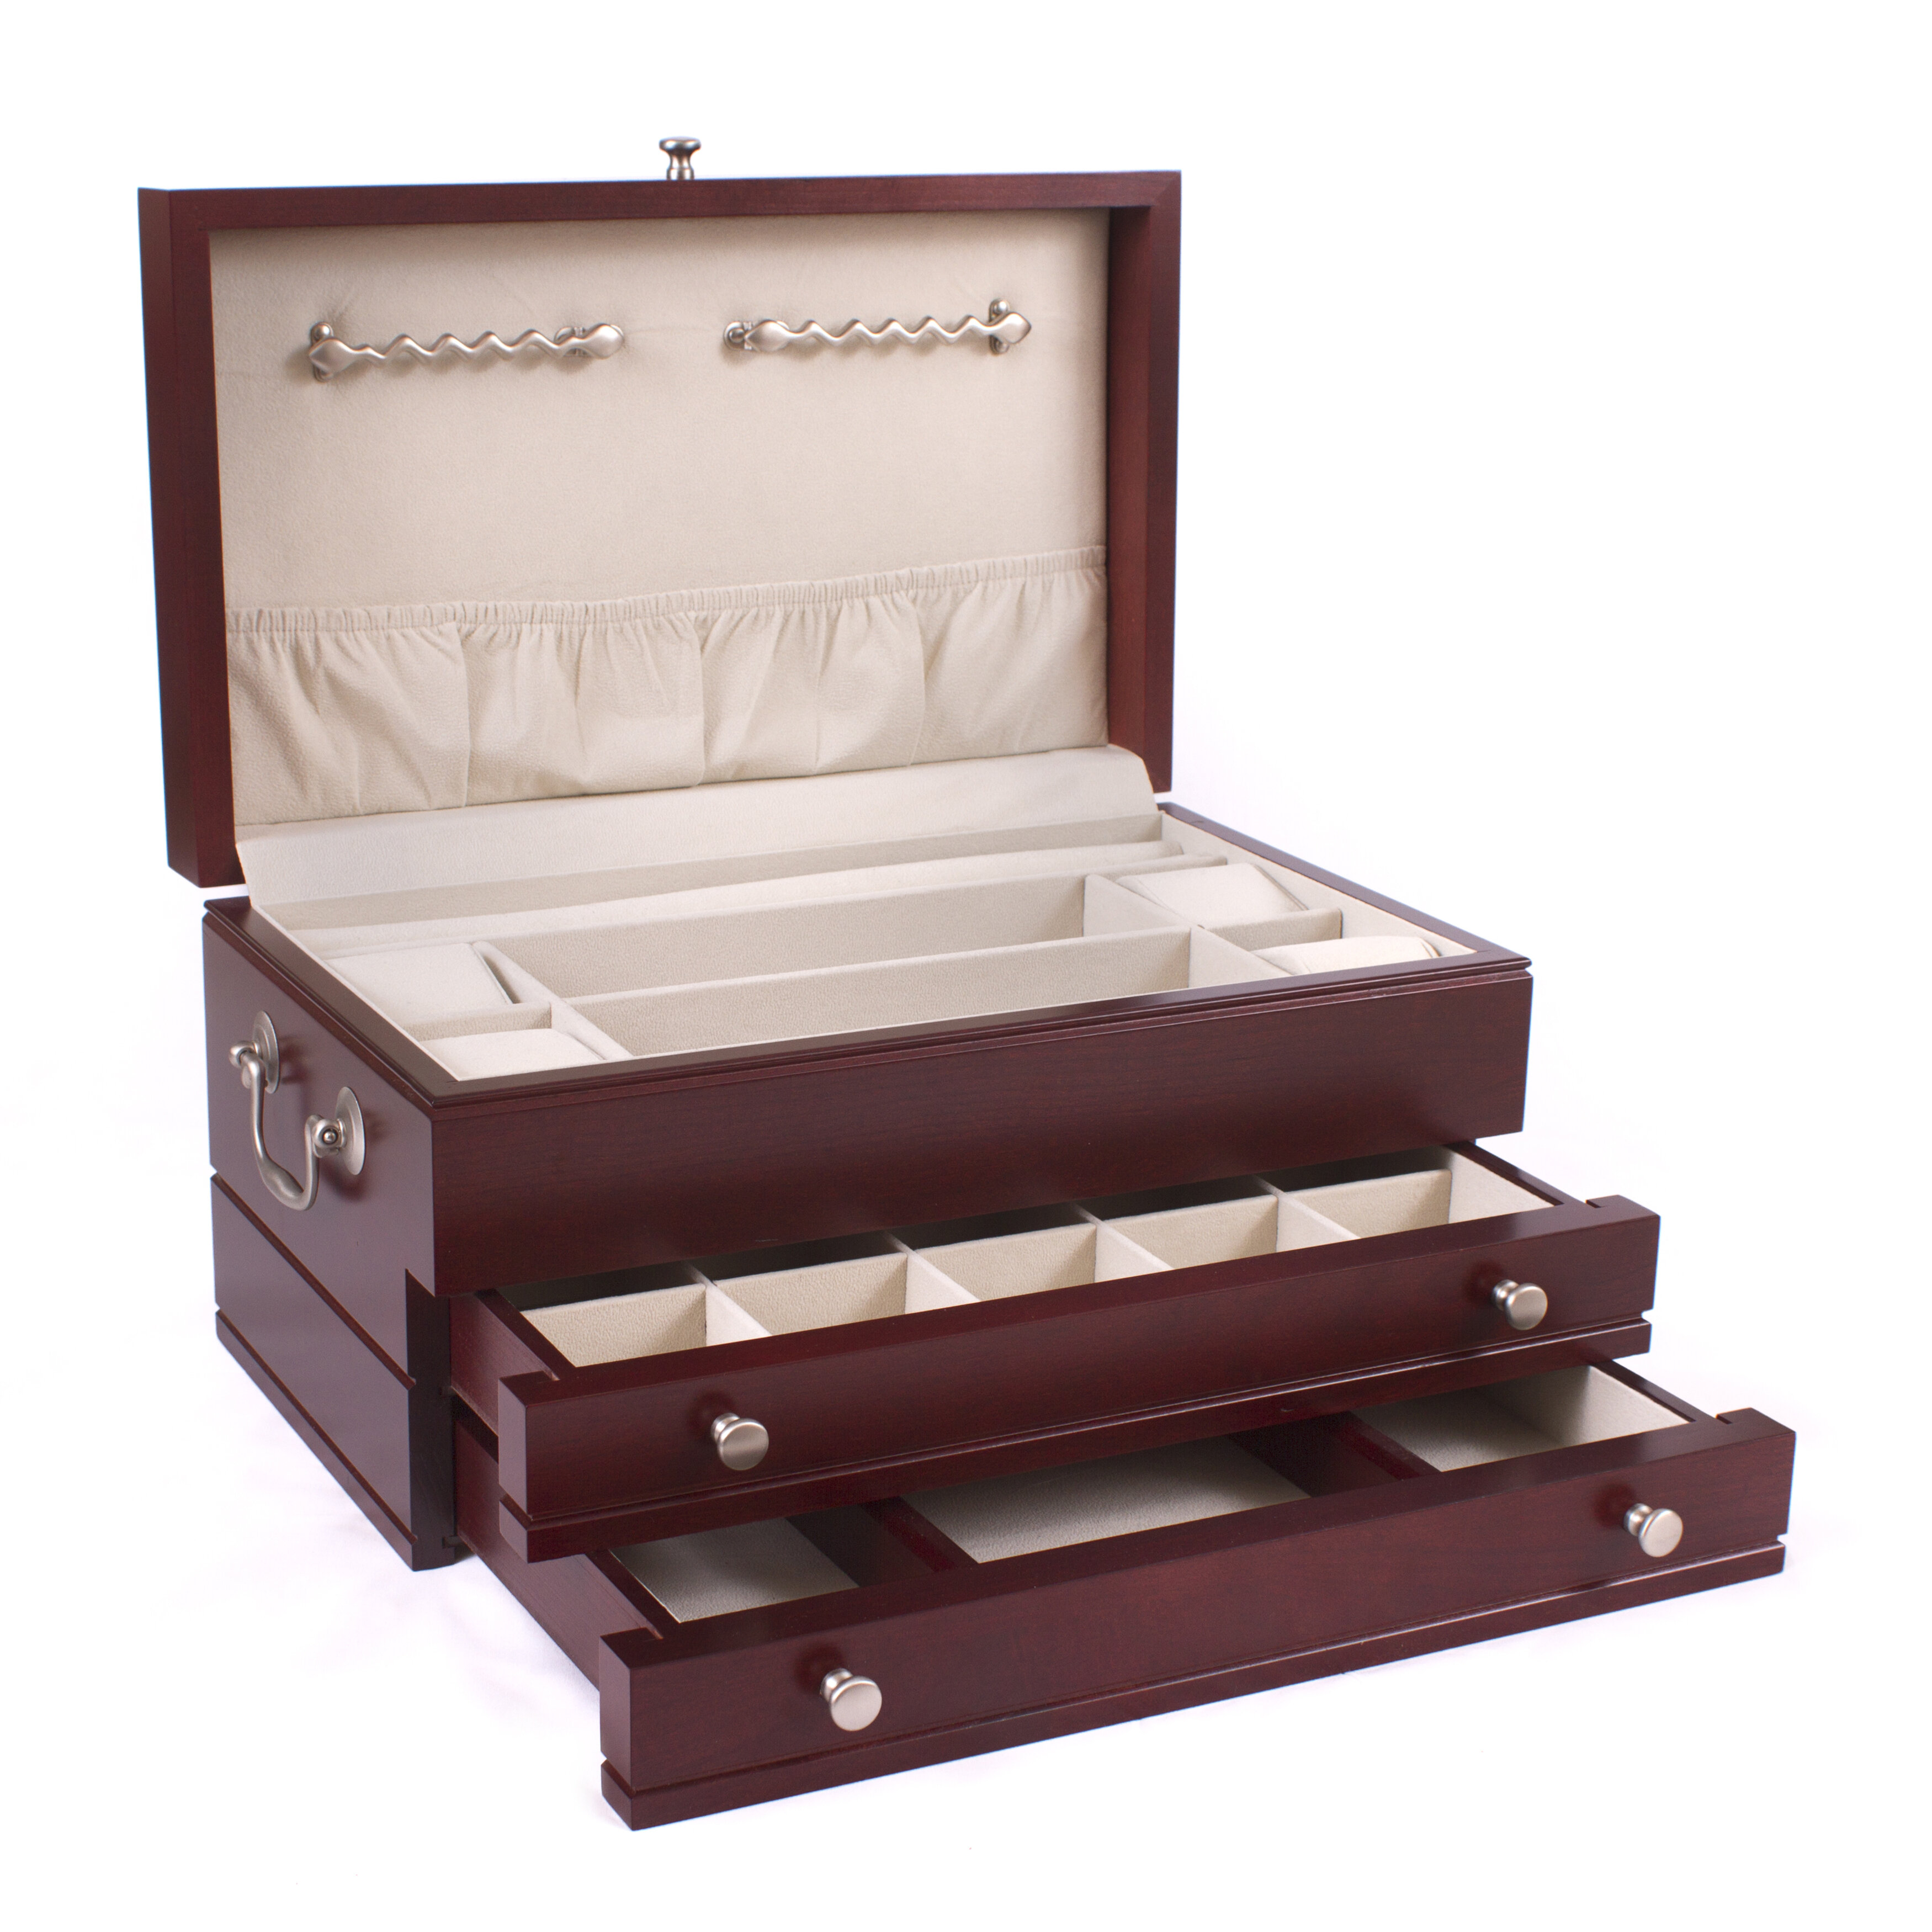 American Chest First Lady Jewelry Box & Reviews | Wayfair